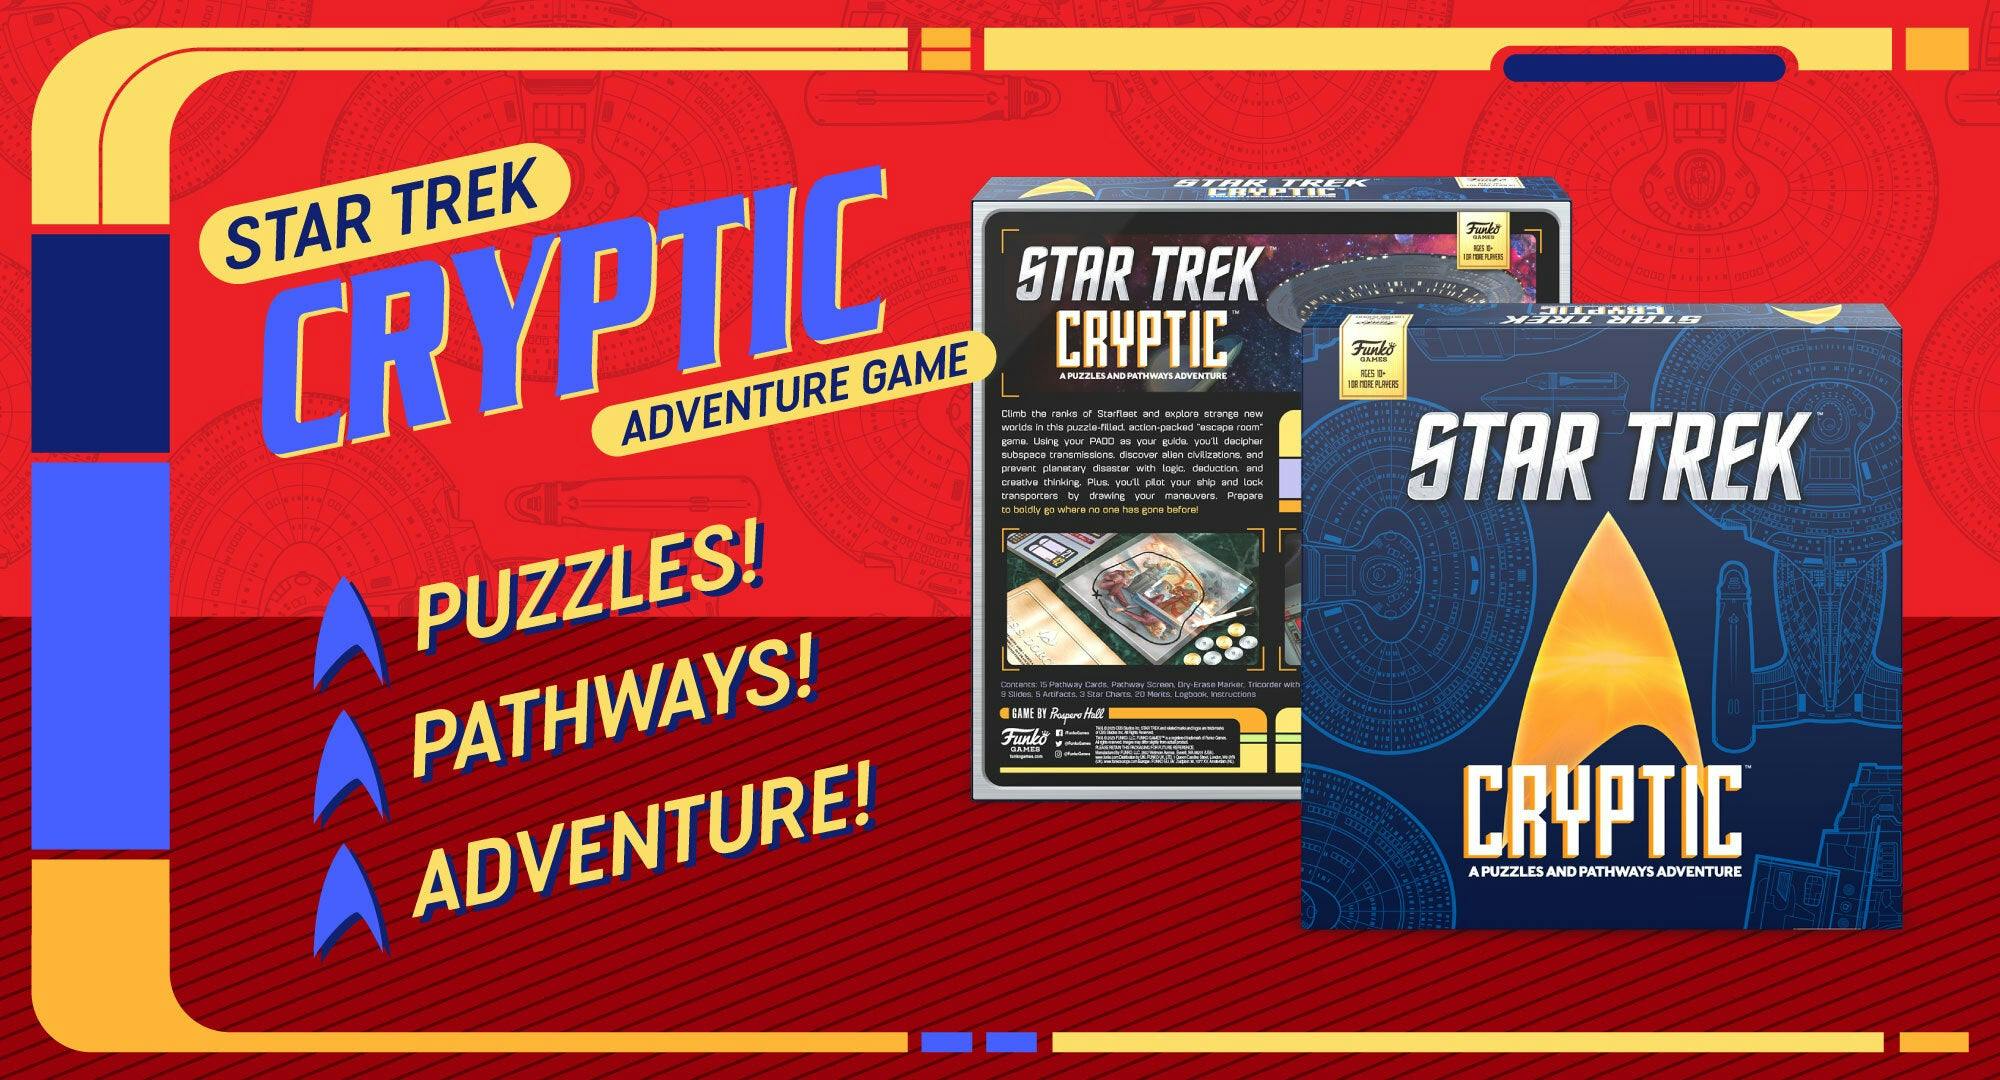 Illustrated art featuring Funko Games' Star Trek Cryptic game